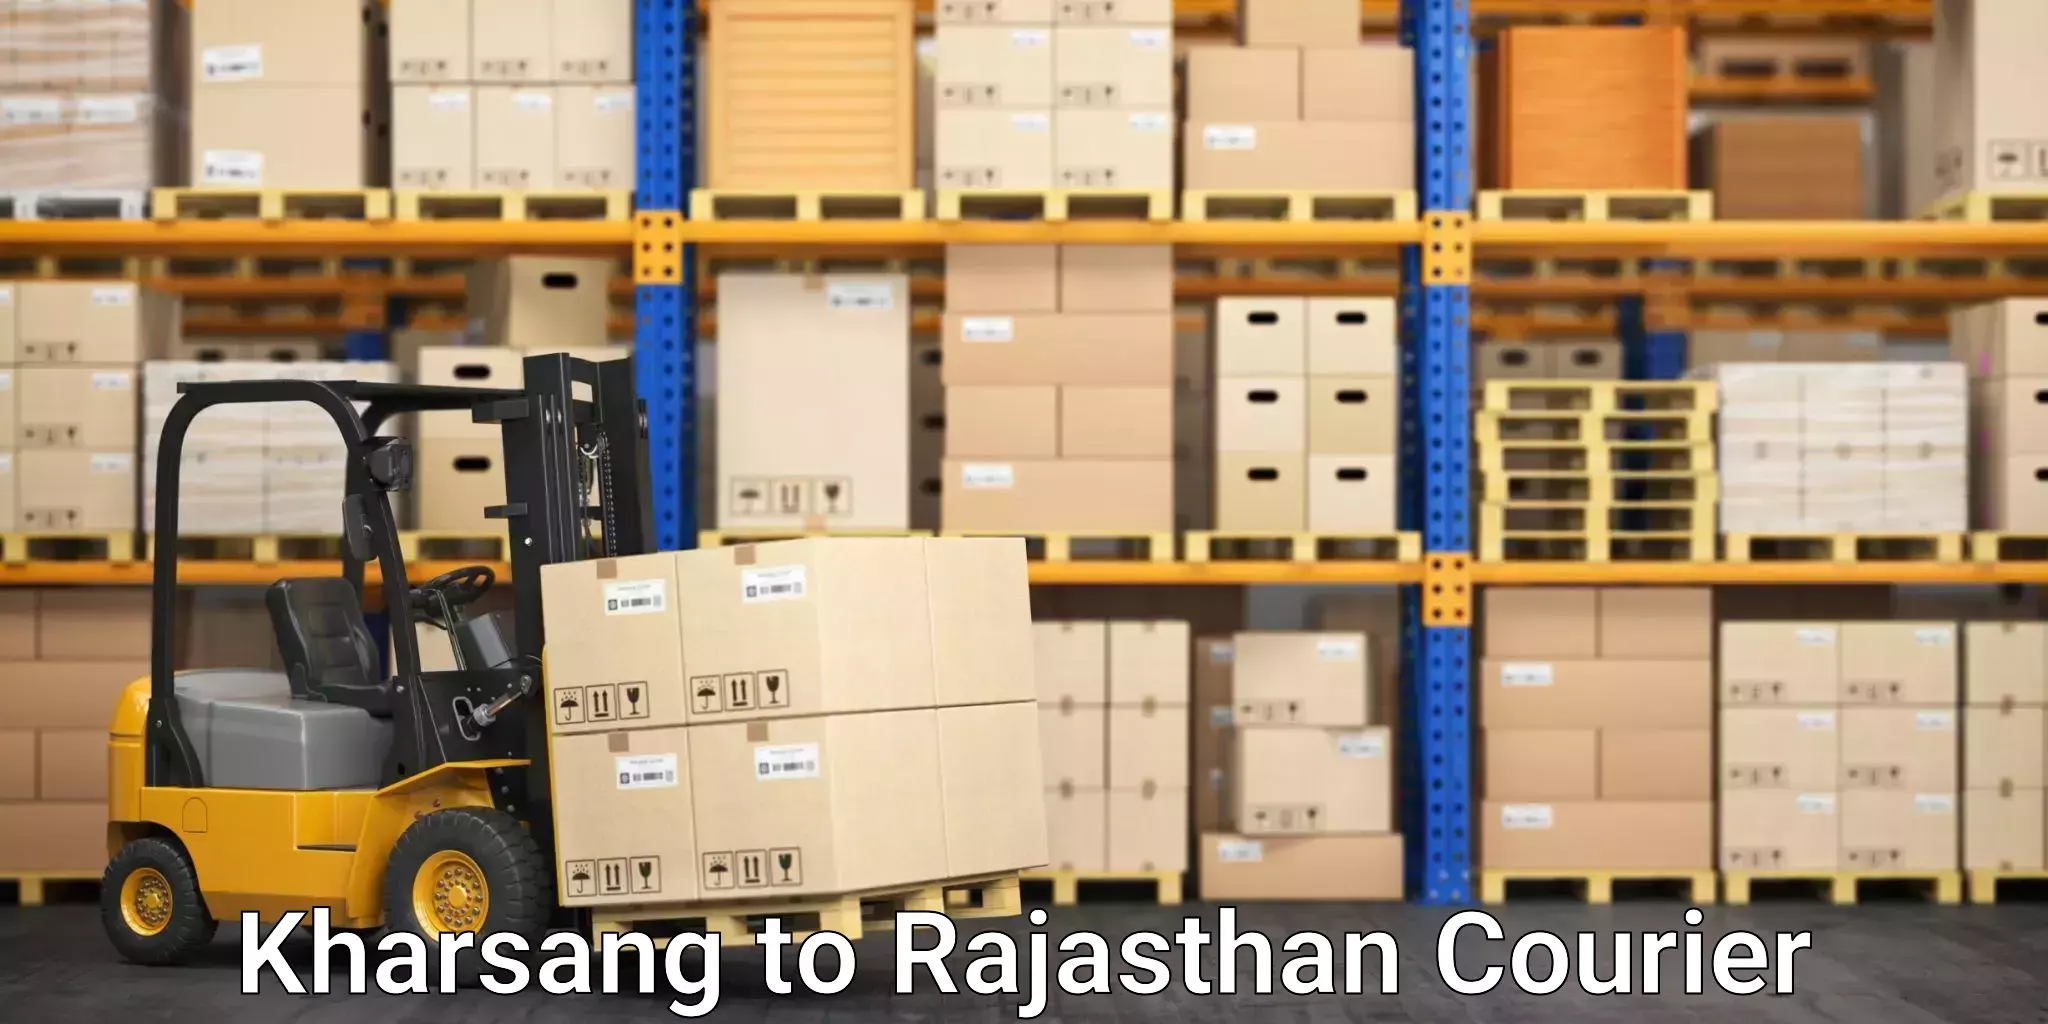 24/7 shipping services Kharsang to Udaipurwati